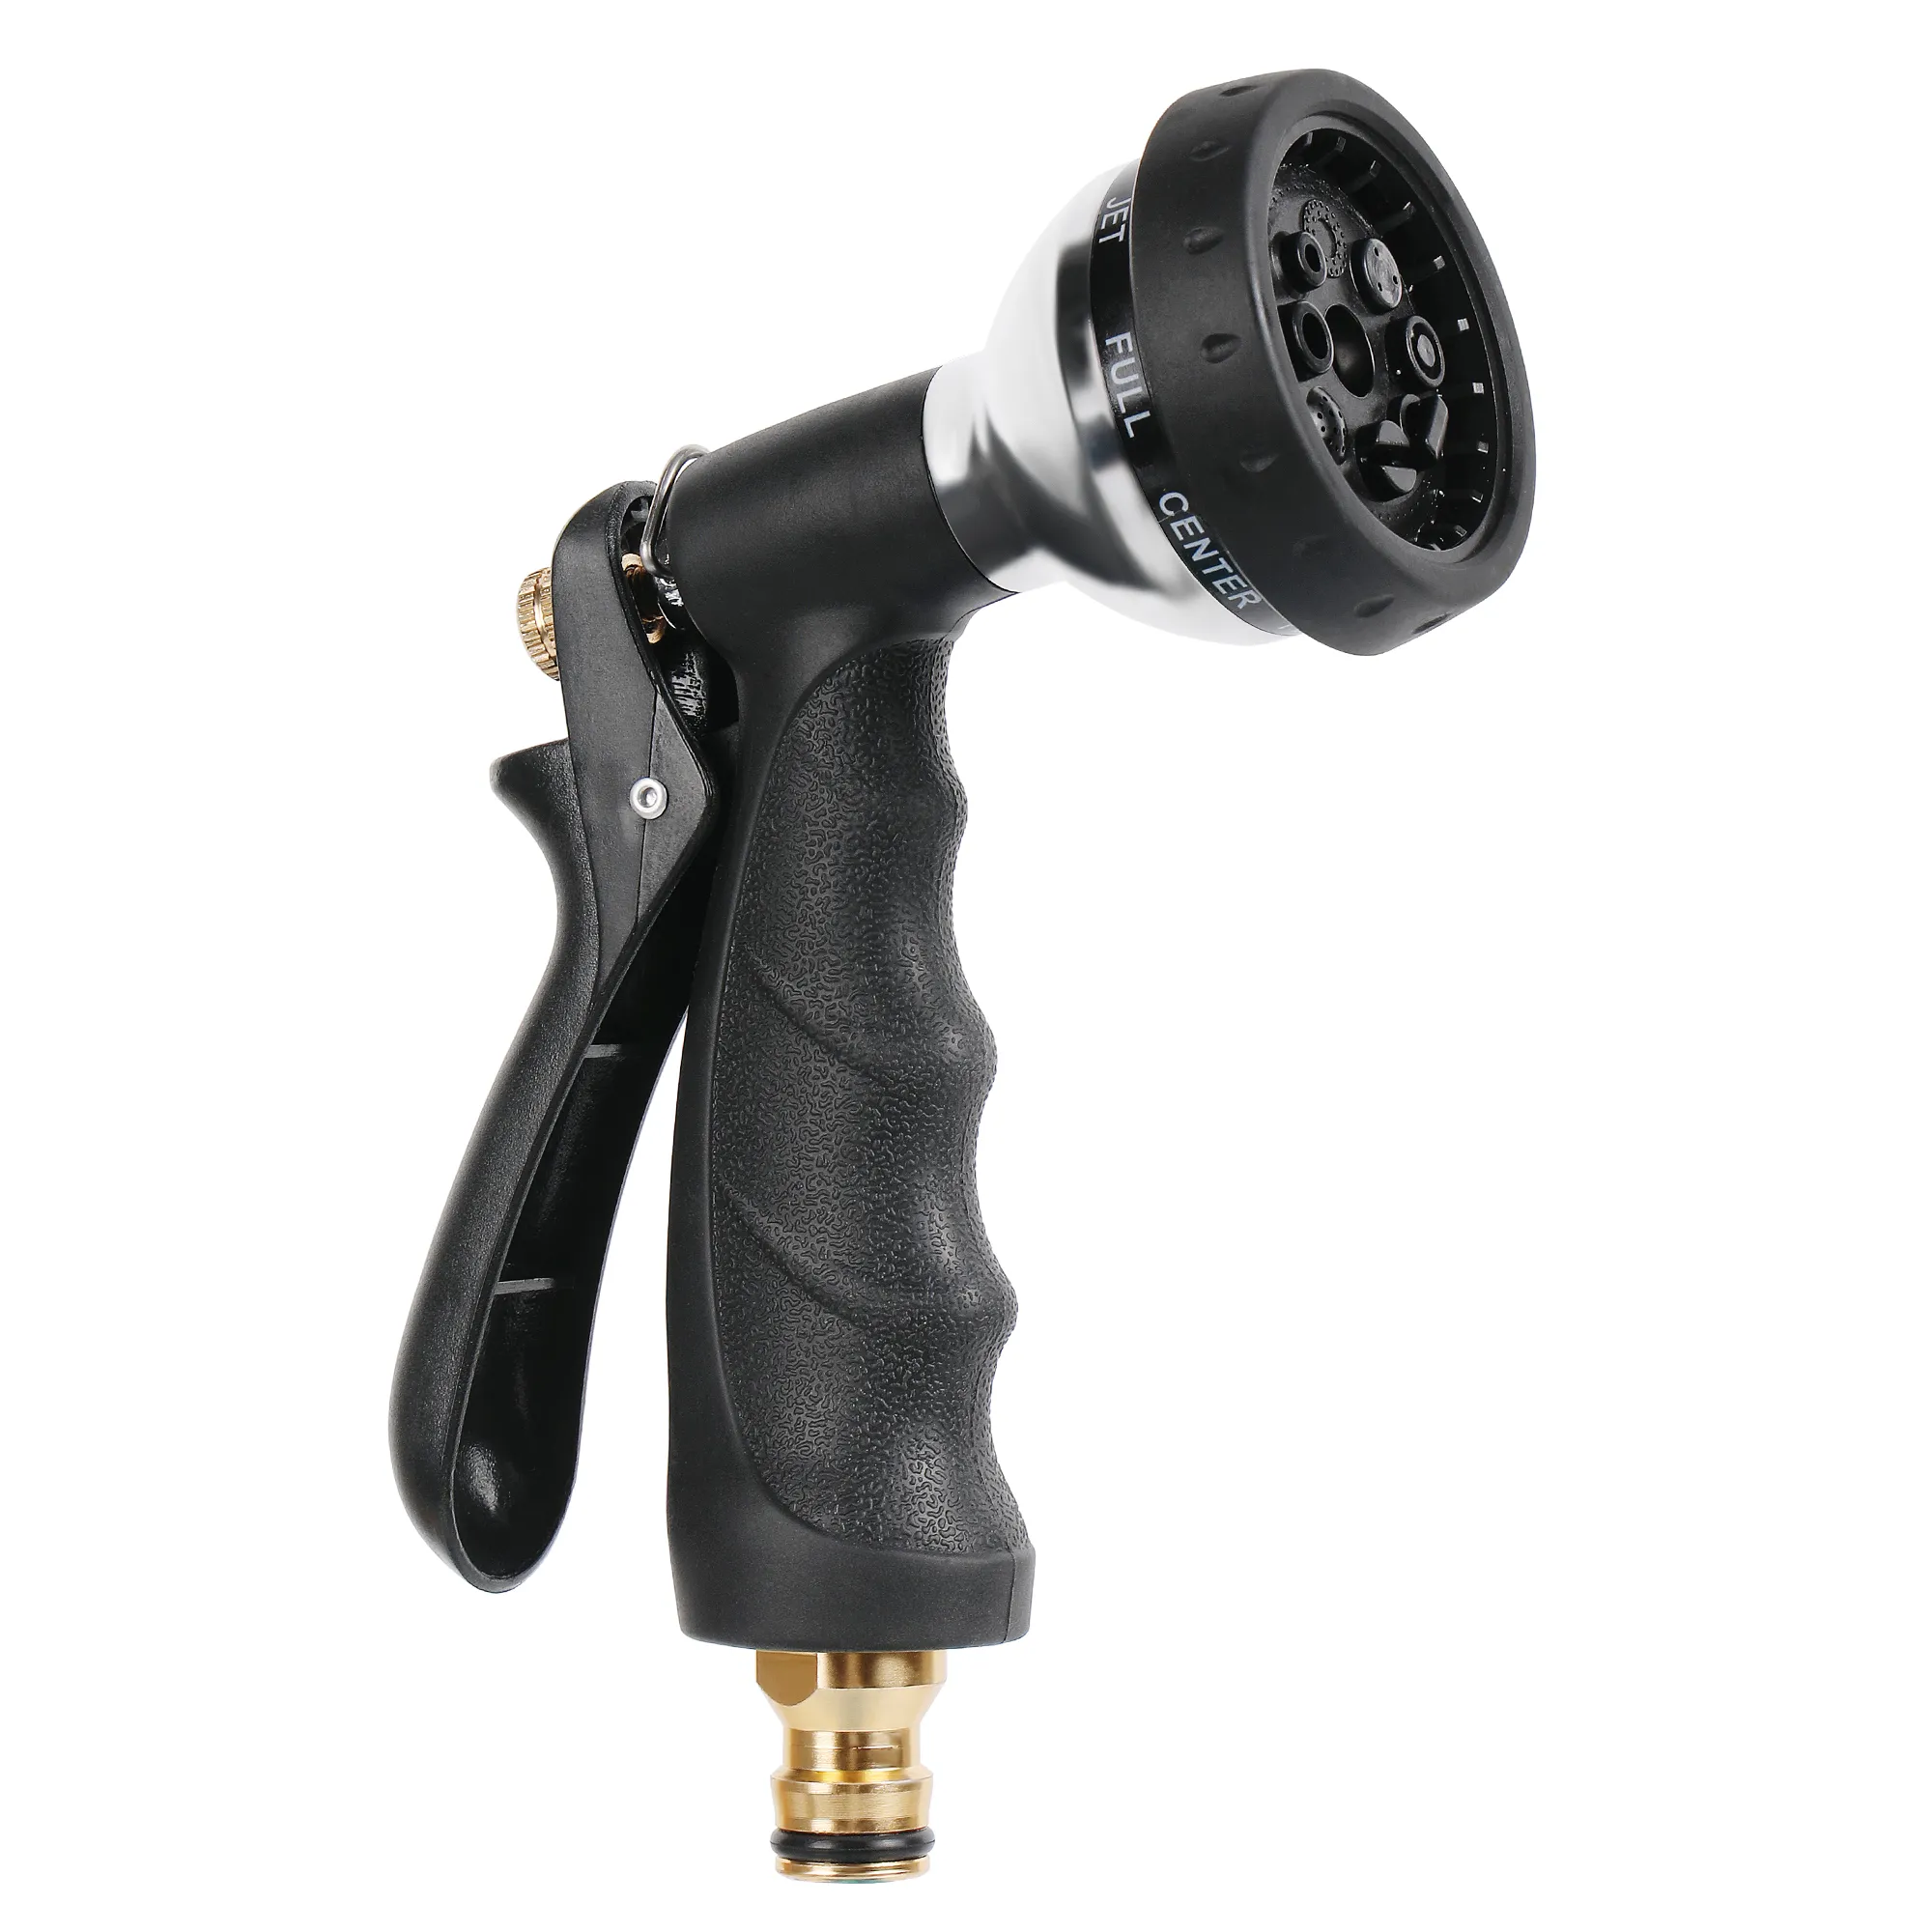 8 Watering Modes Garden Hose Nozzle, made of alloy with soft rubber coating, Ergonomic and Comfortable Handle